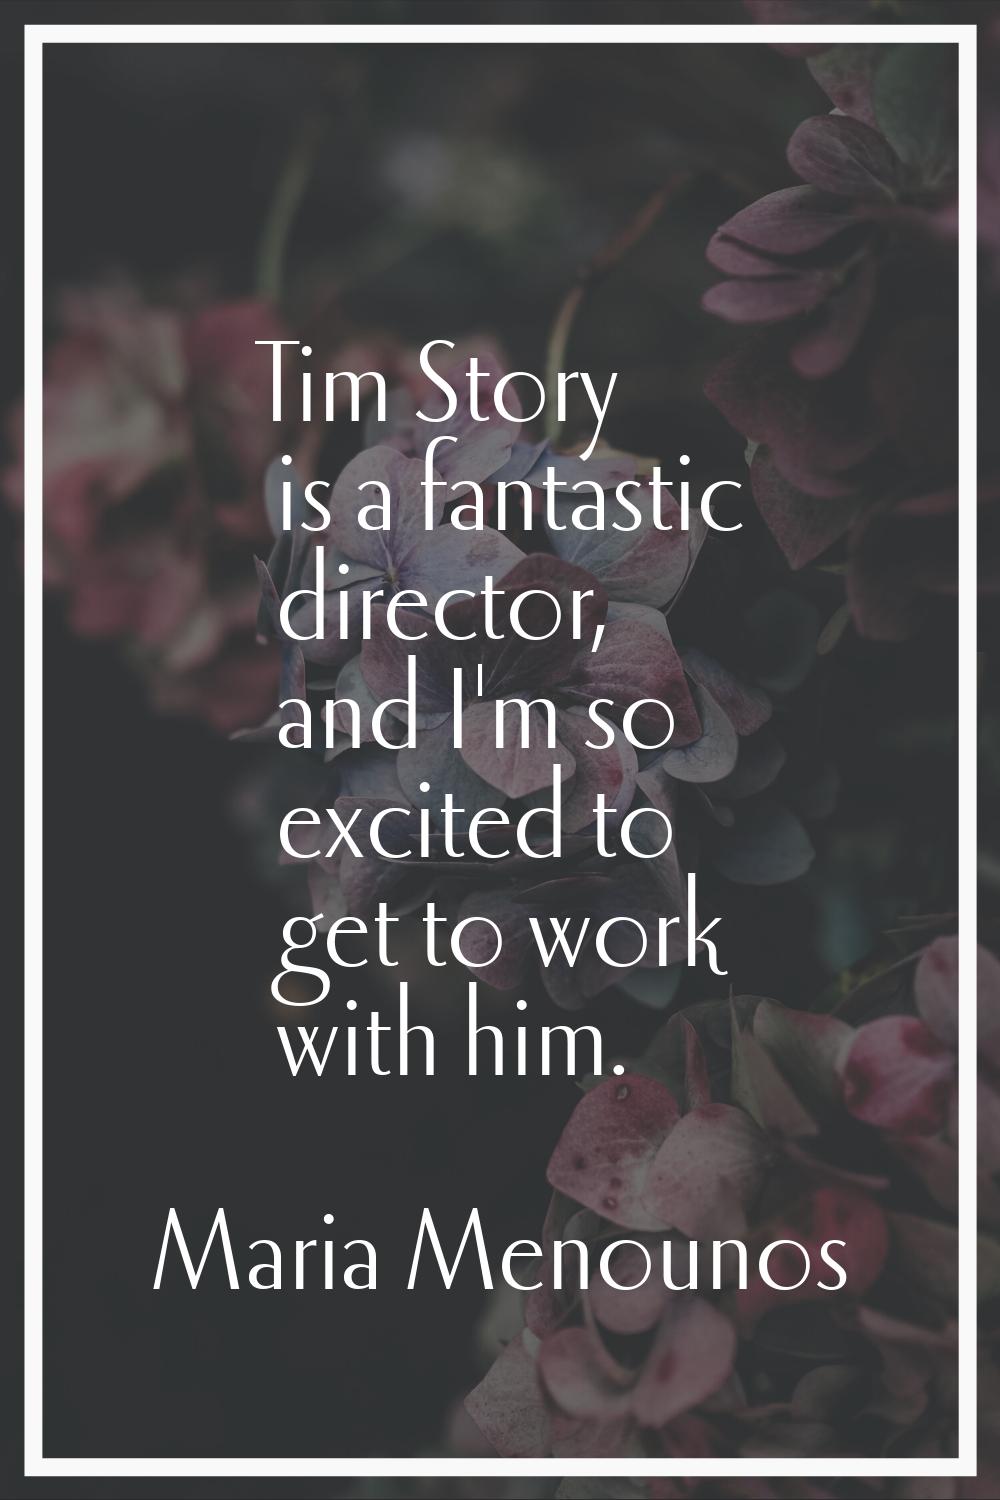 Tim Story is a fantastic director, and I'm so excited to get to work with him.